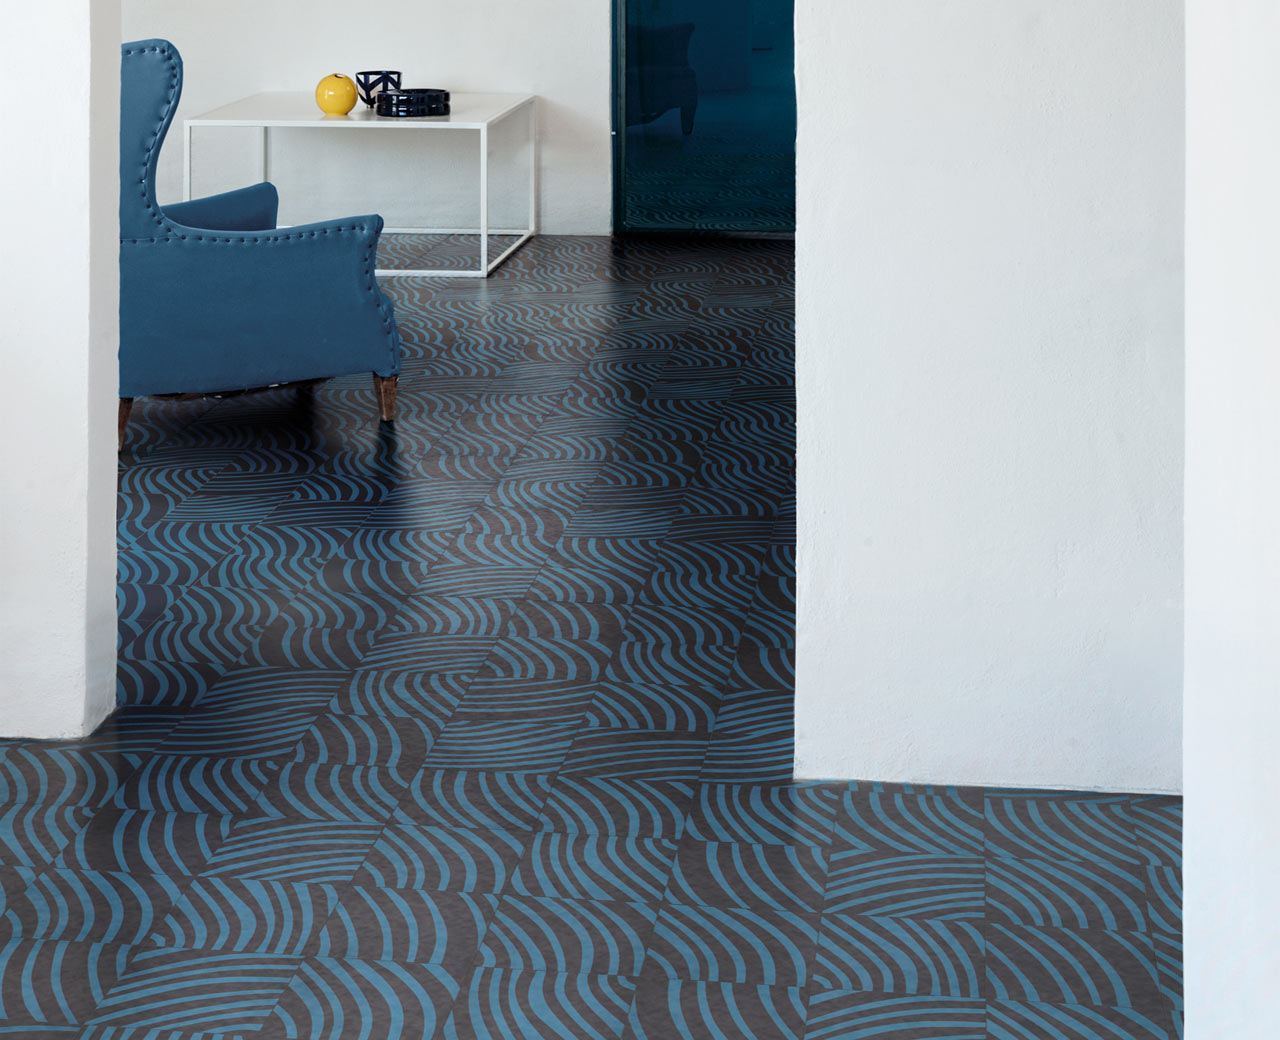 Tonal Collection includes lots of colorful and printed tiles that are sure to make any space more special